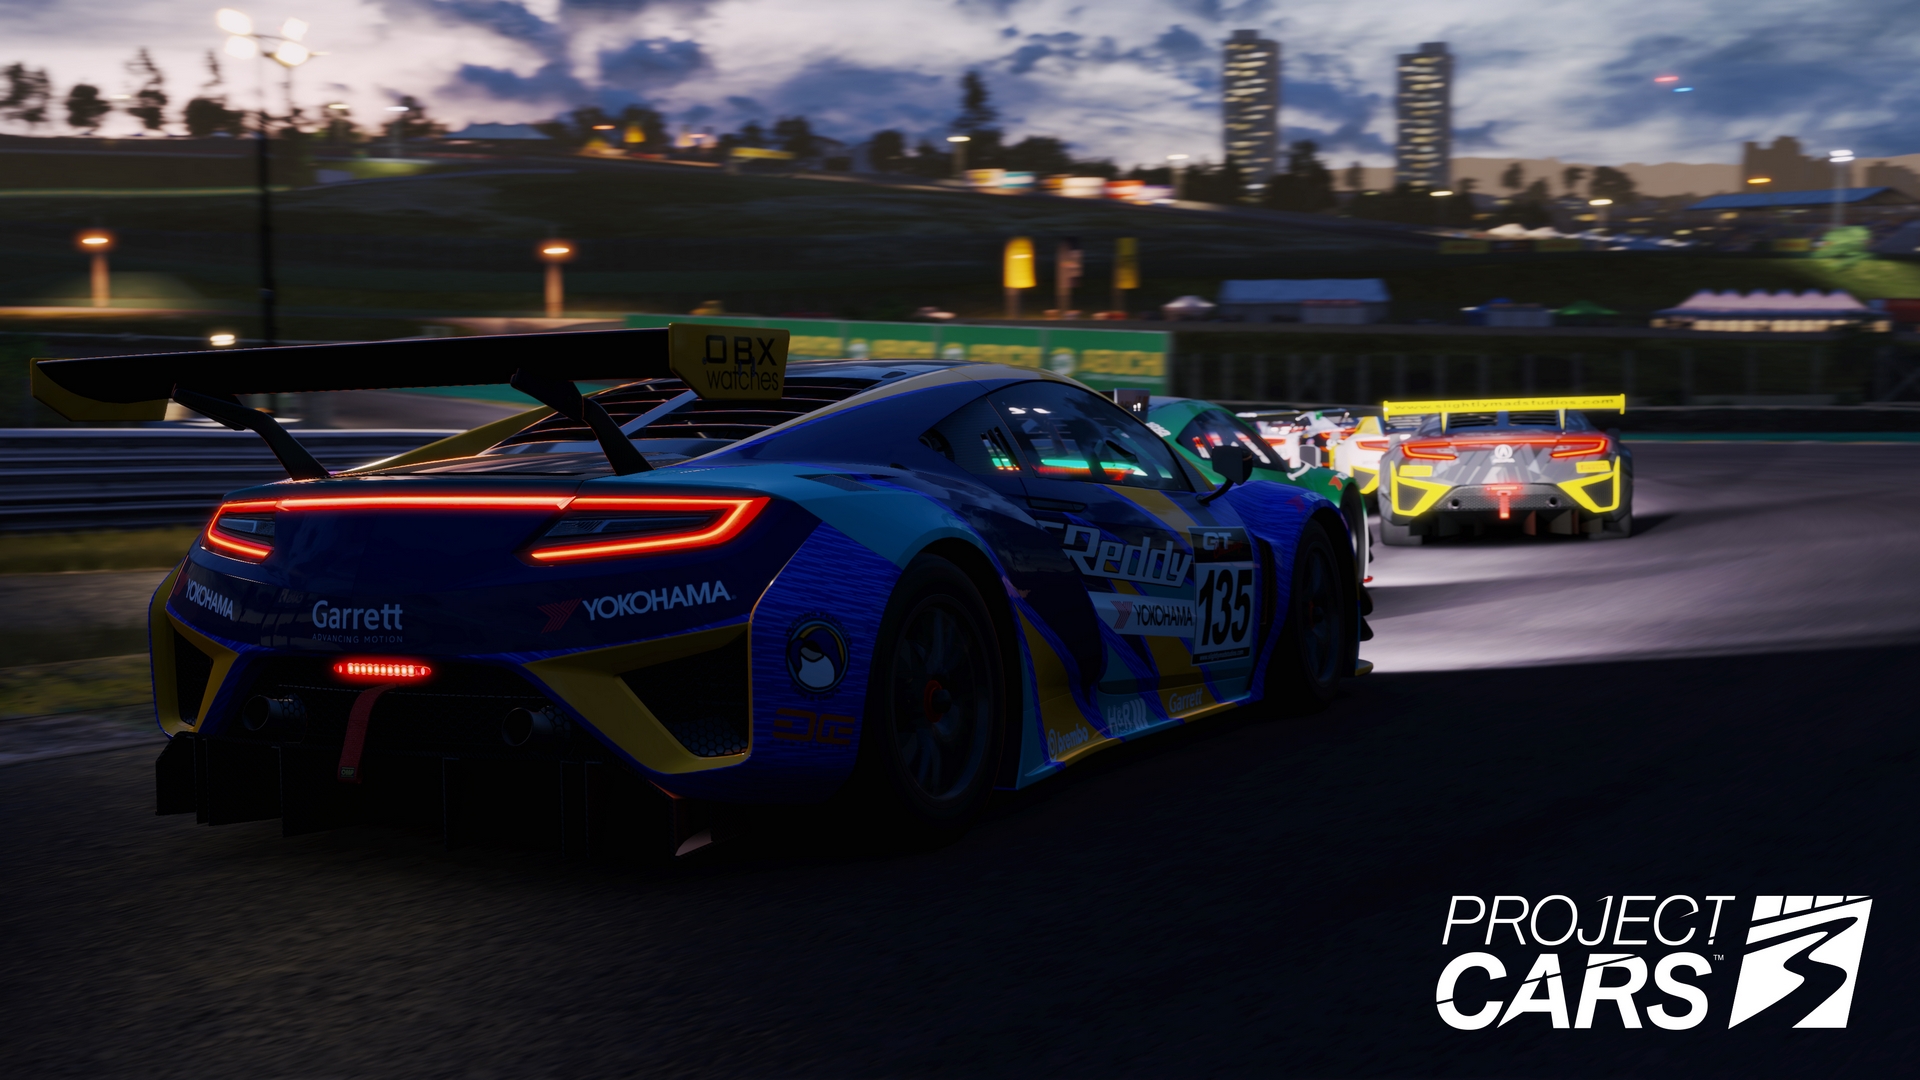 Project Cars 3 data